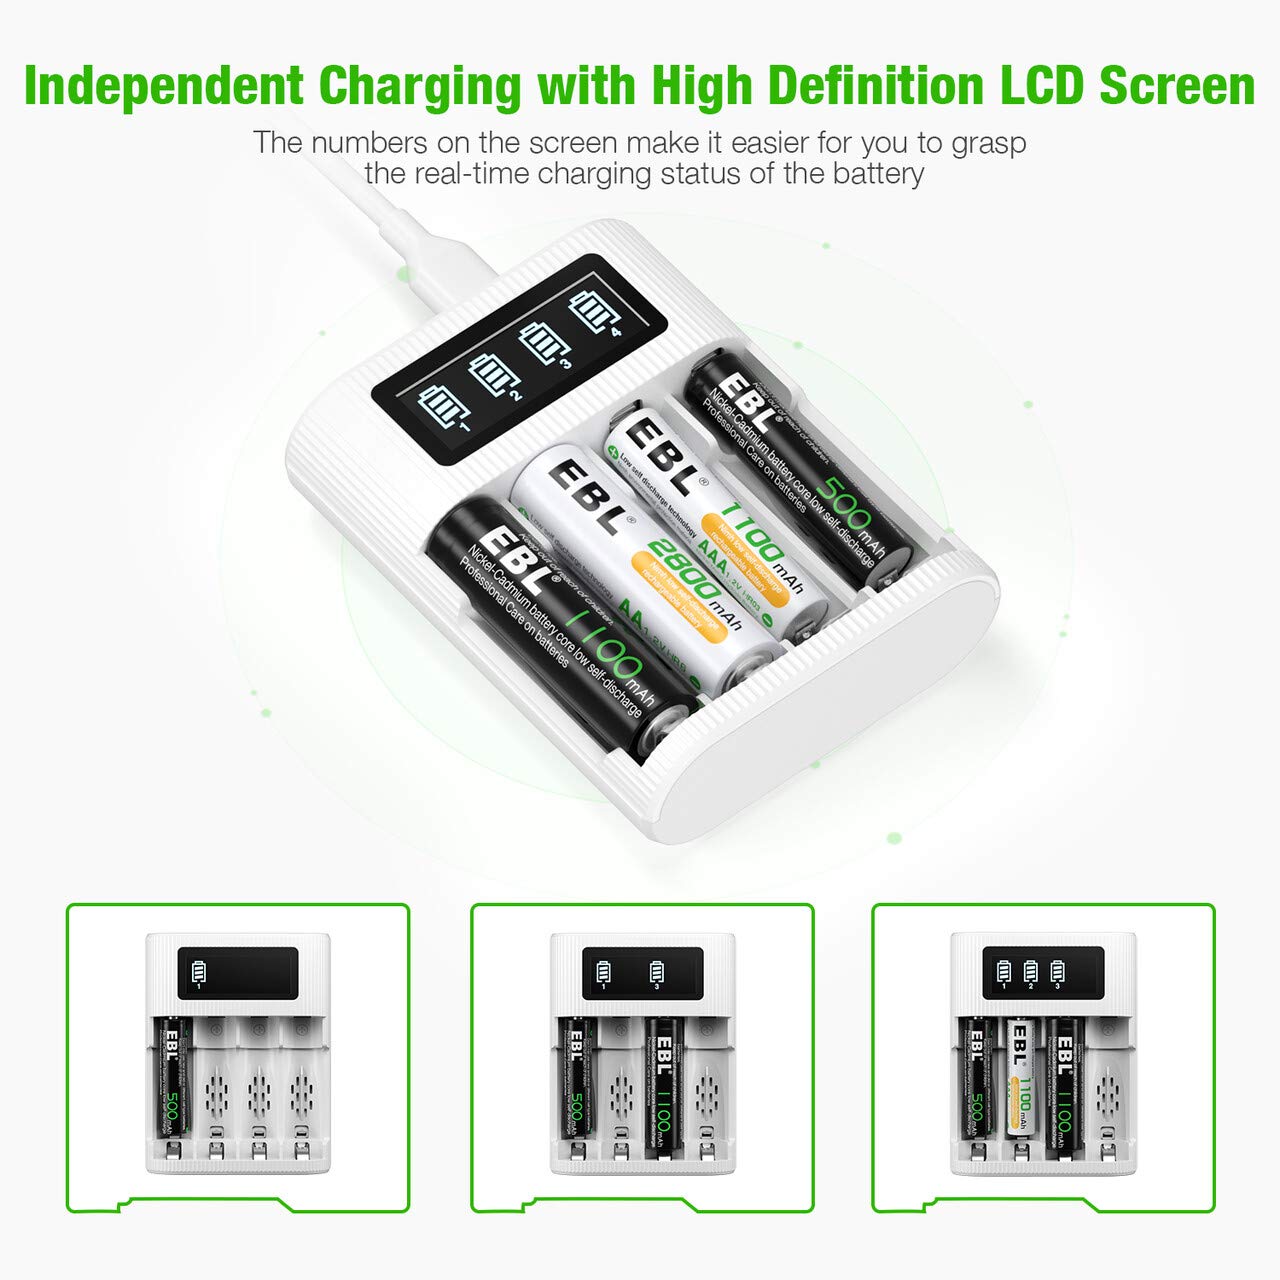 EBL LCD Battery Charger AA AAA Rechargeable Battery Charger - 4 Bay Smart LCD Charger with 2 USB Input Port for Ni-CD Ni-MH Battery